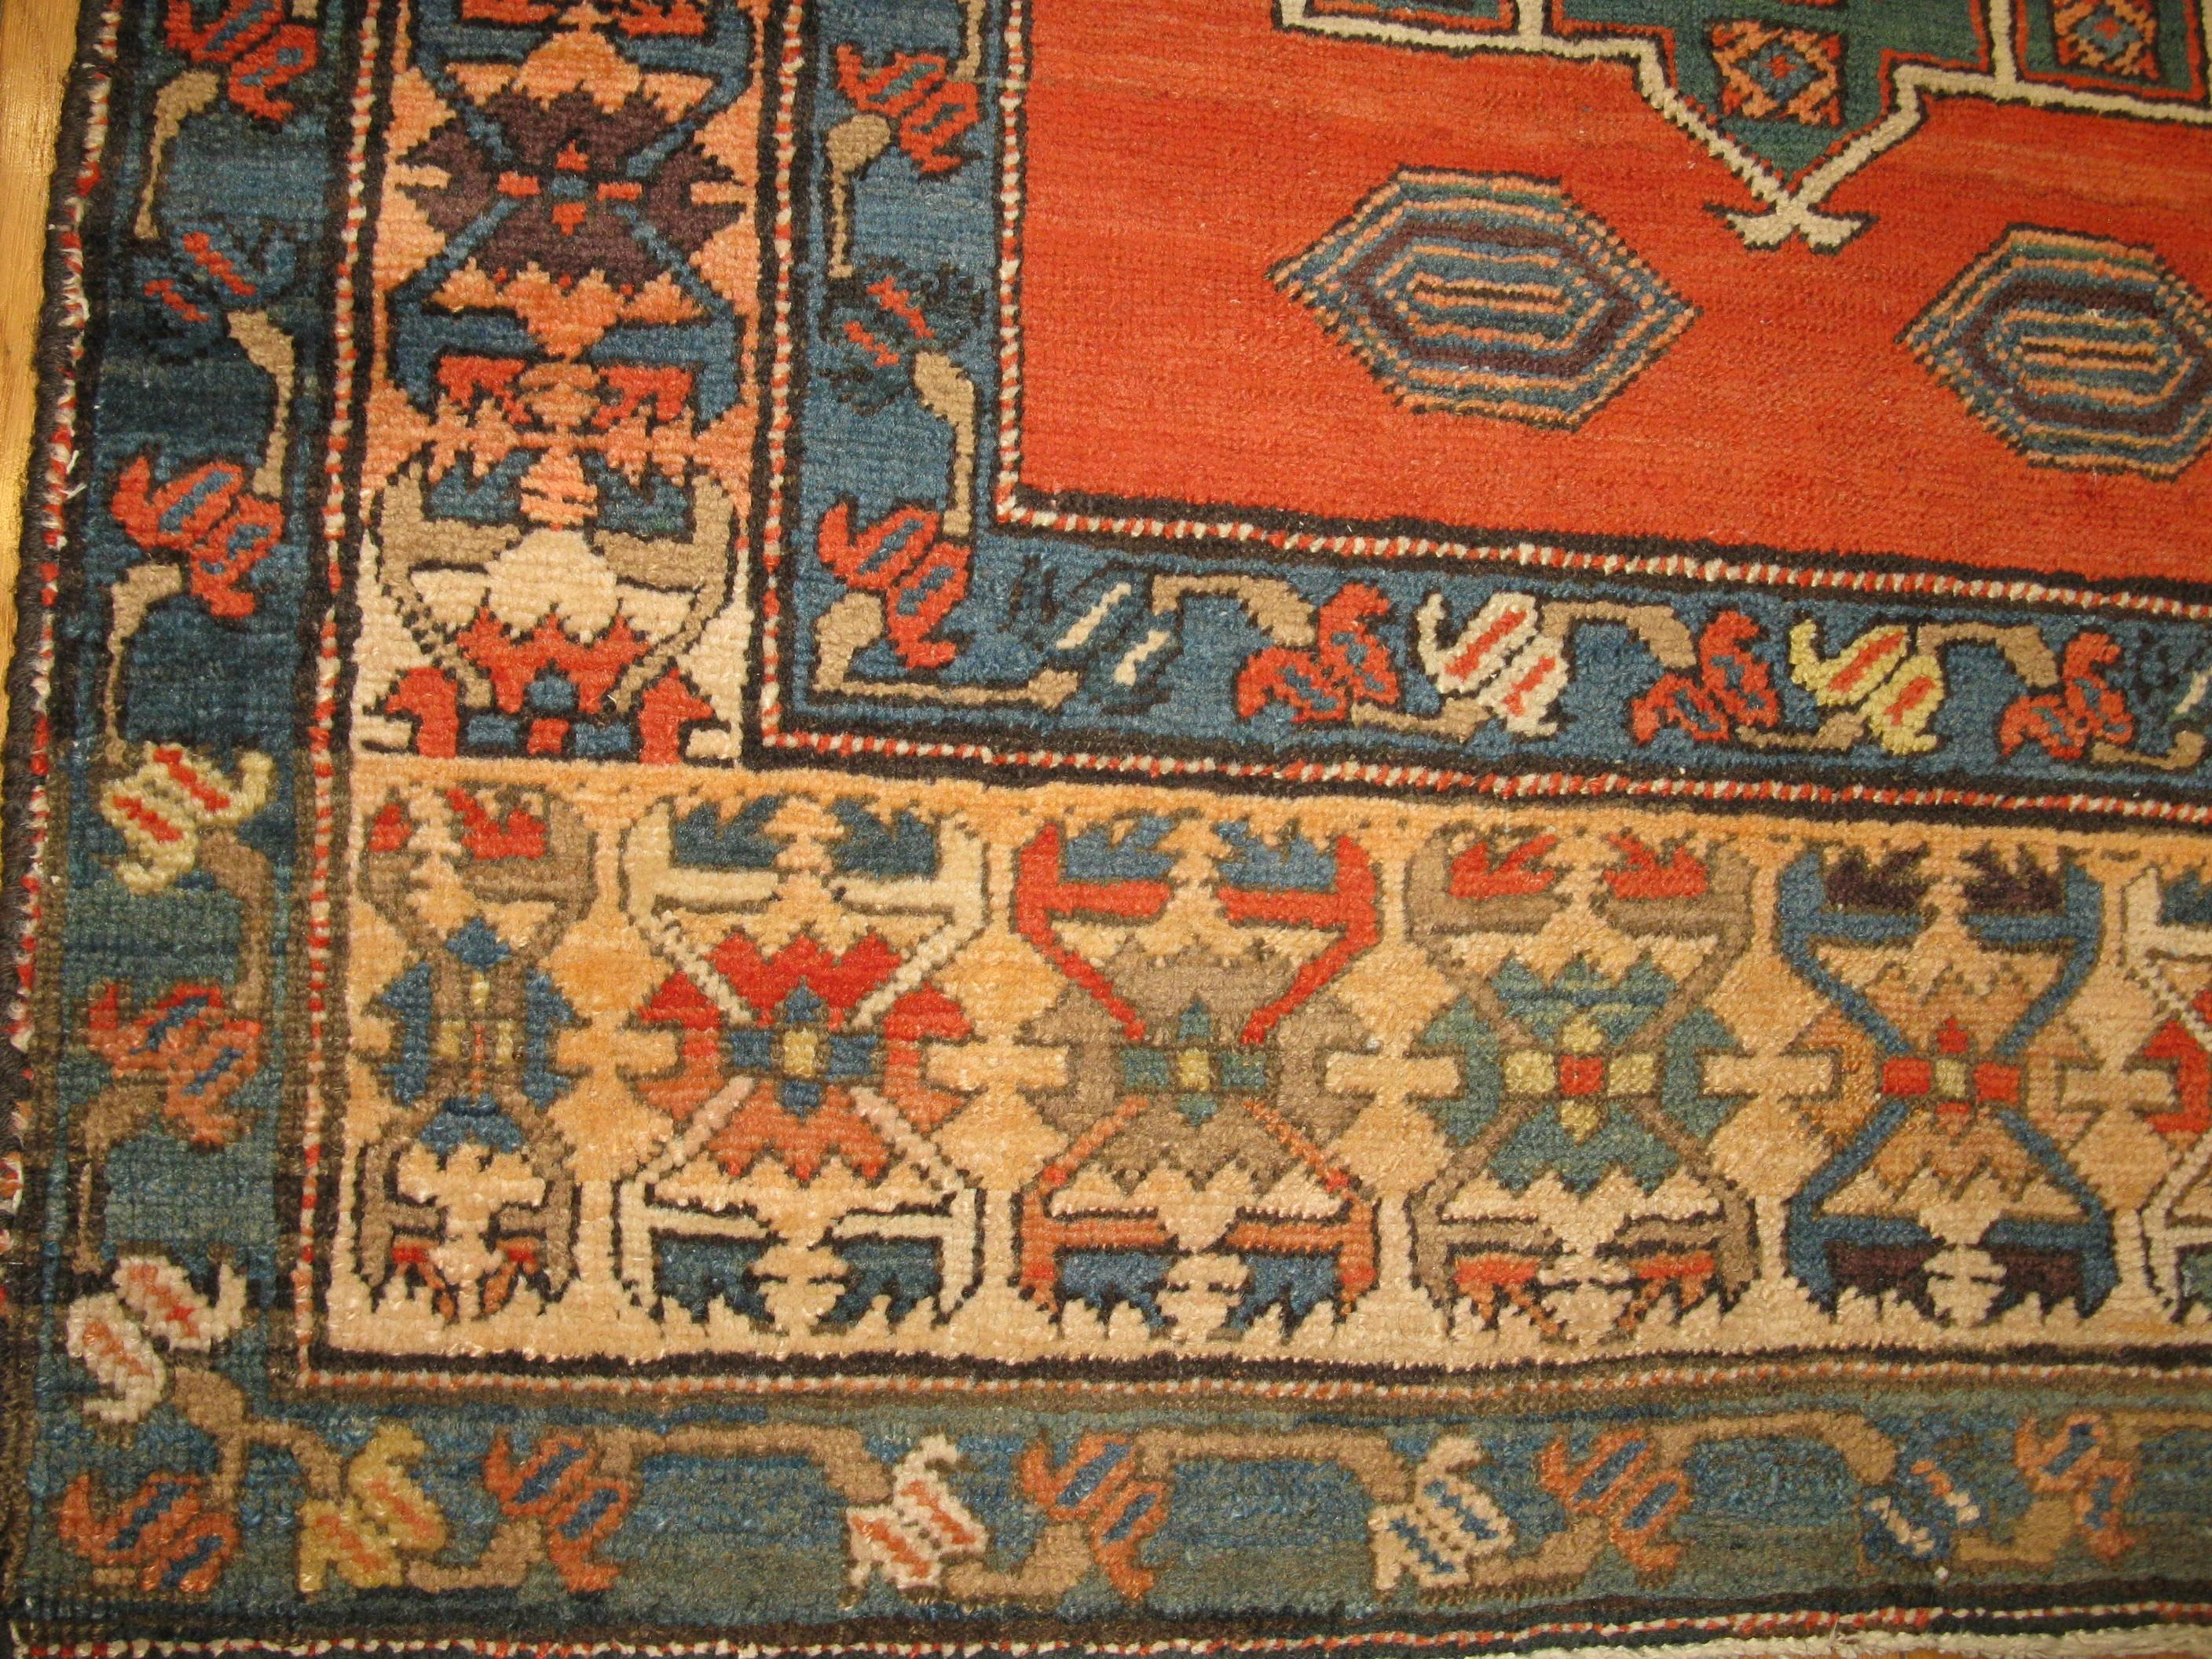 Antique Hand-Knotted Persian Bakshayesh Runner Rug In Excellent Condition For Sale In Atlanta, GA